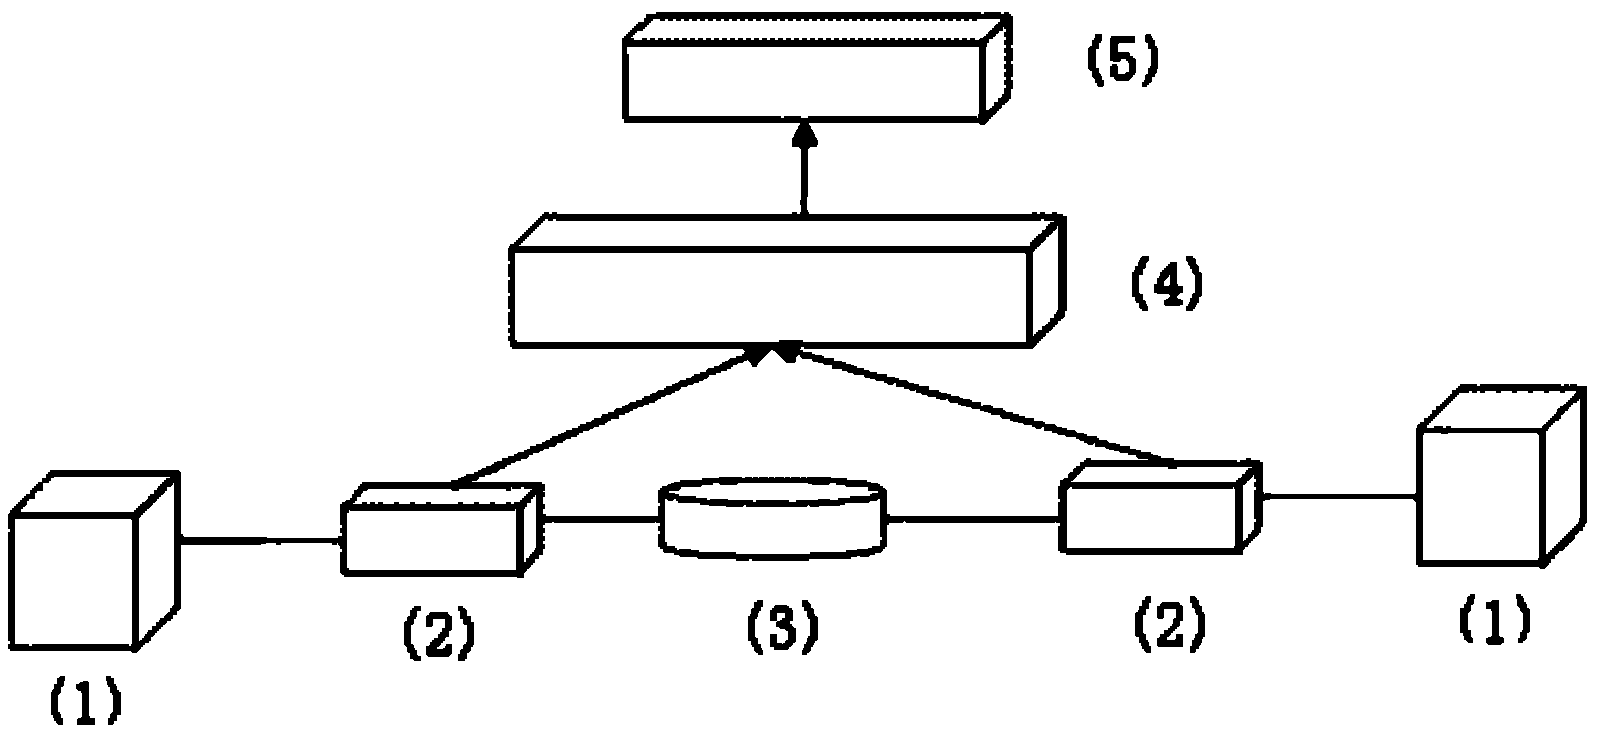 Method and applications of network monitoring data packet with timestamp